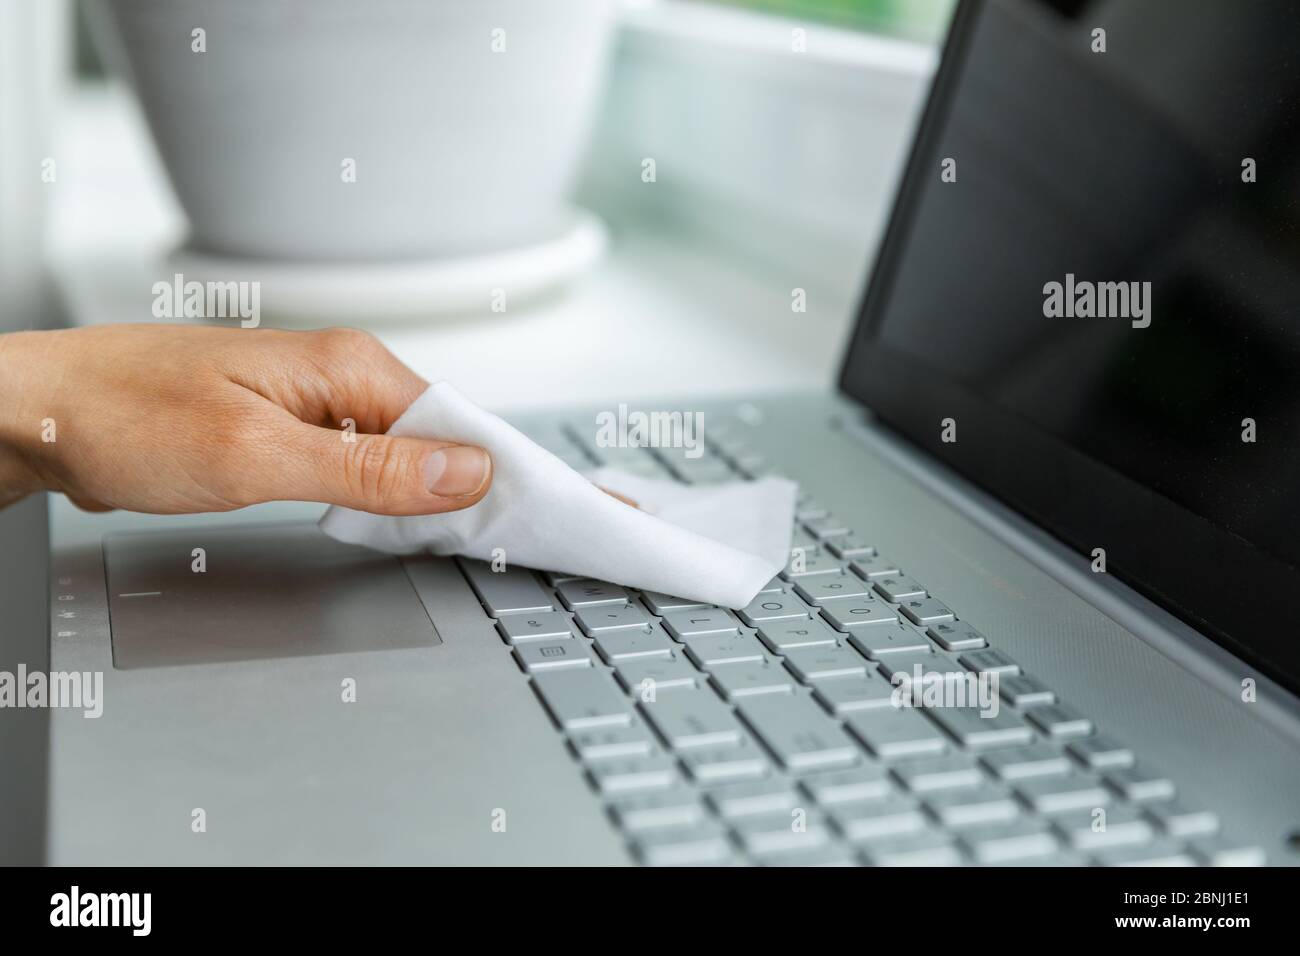 electronics disinfection and hygiene - hand cleaning laptop keyboard with antibacterial wet wipe Stock Photo